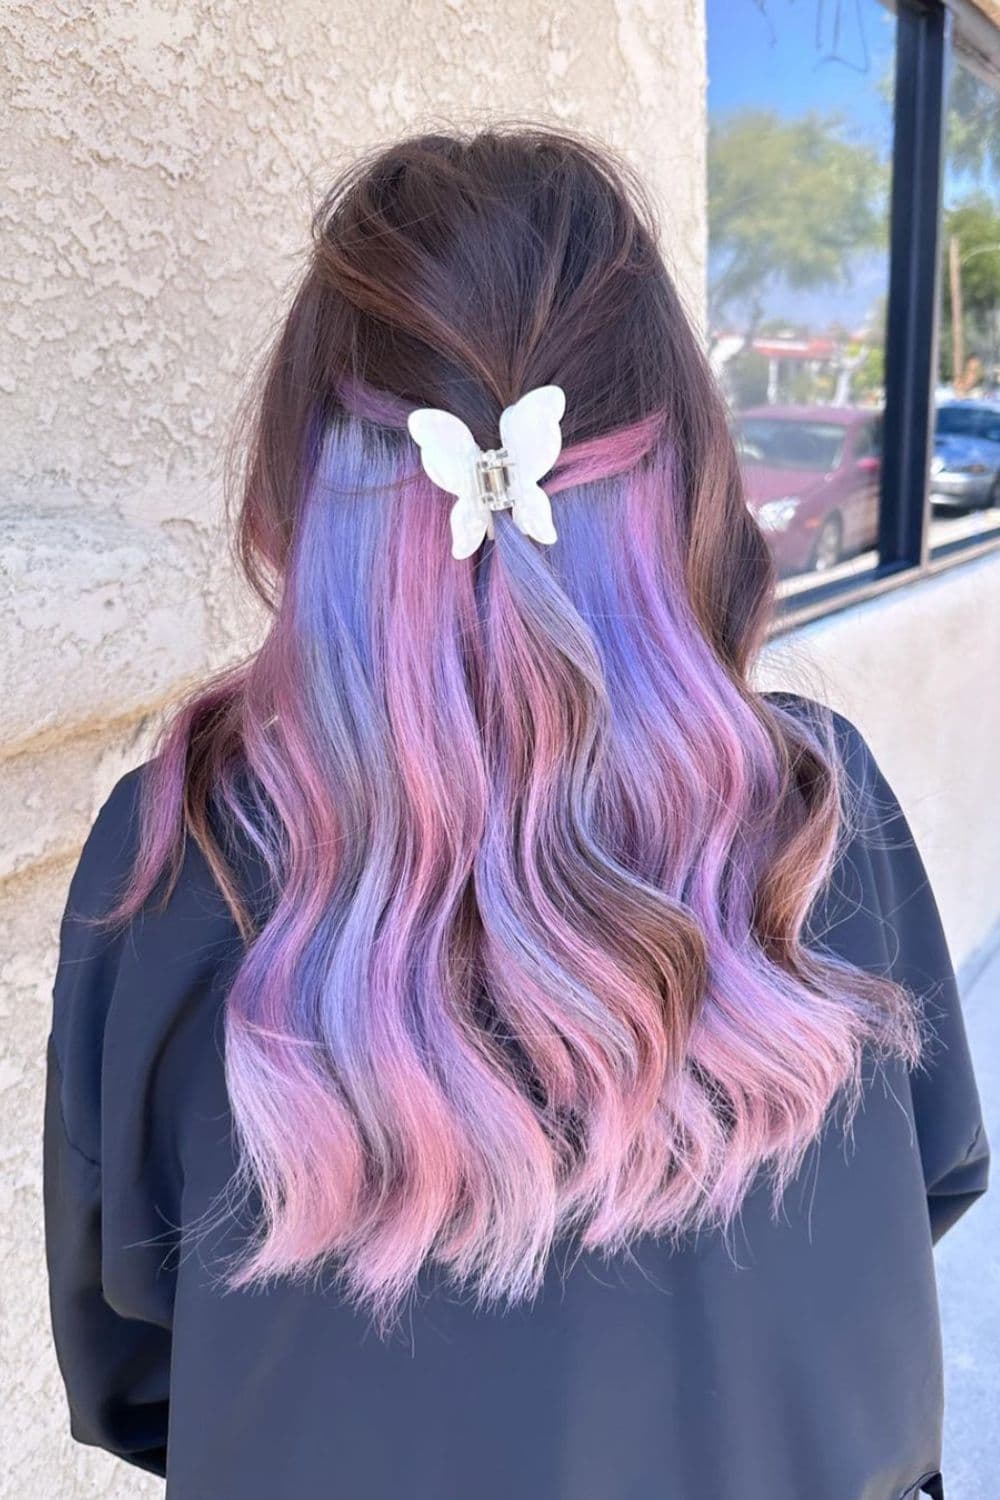 A woman with long brown hair with pastel colors peekaboo.